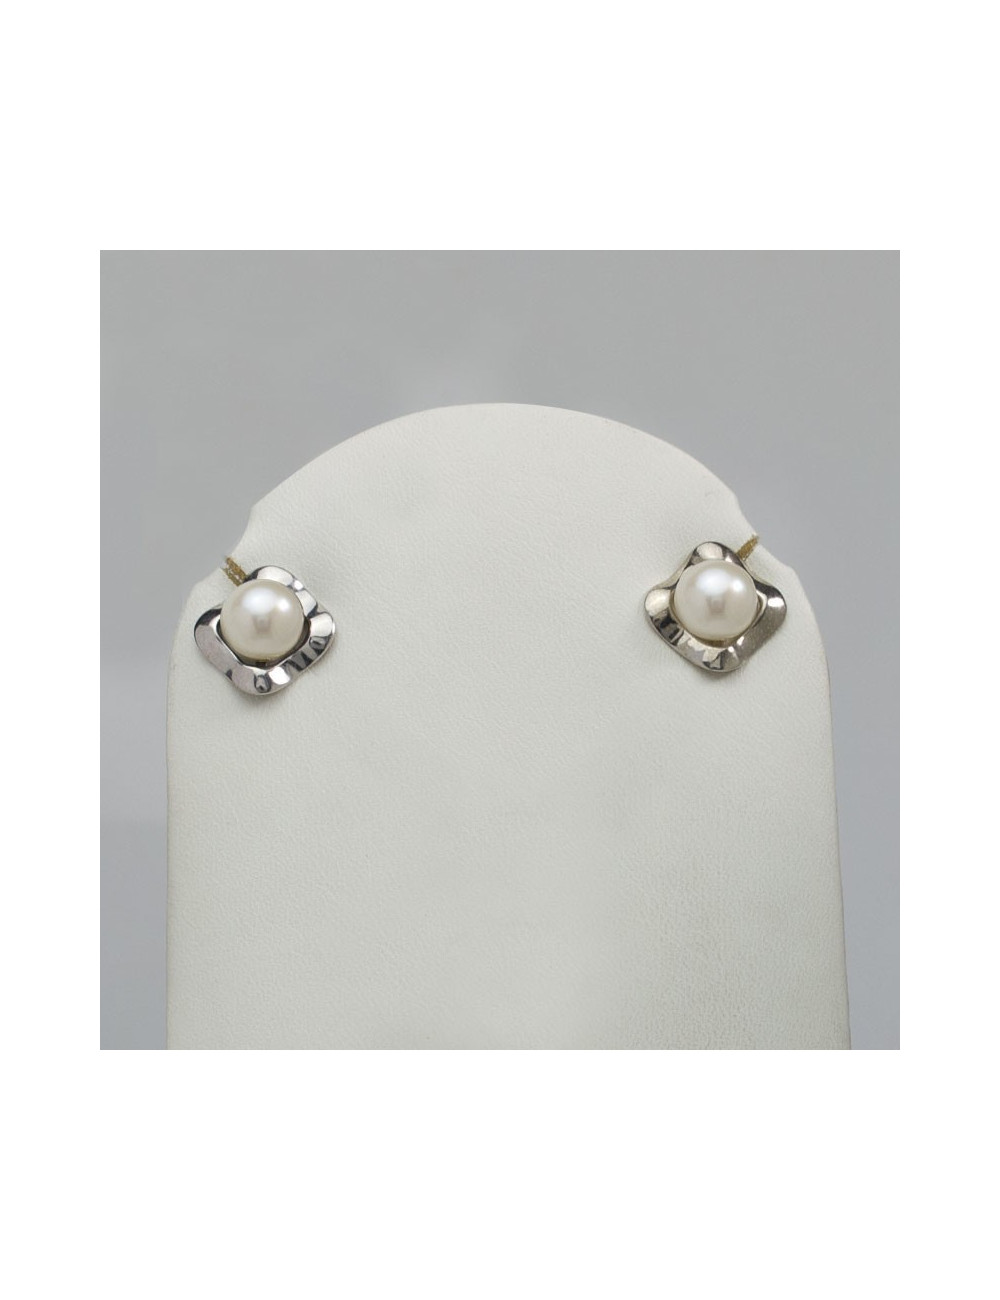 Silver earrings with freshwater pearls KDNP0050S